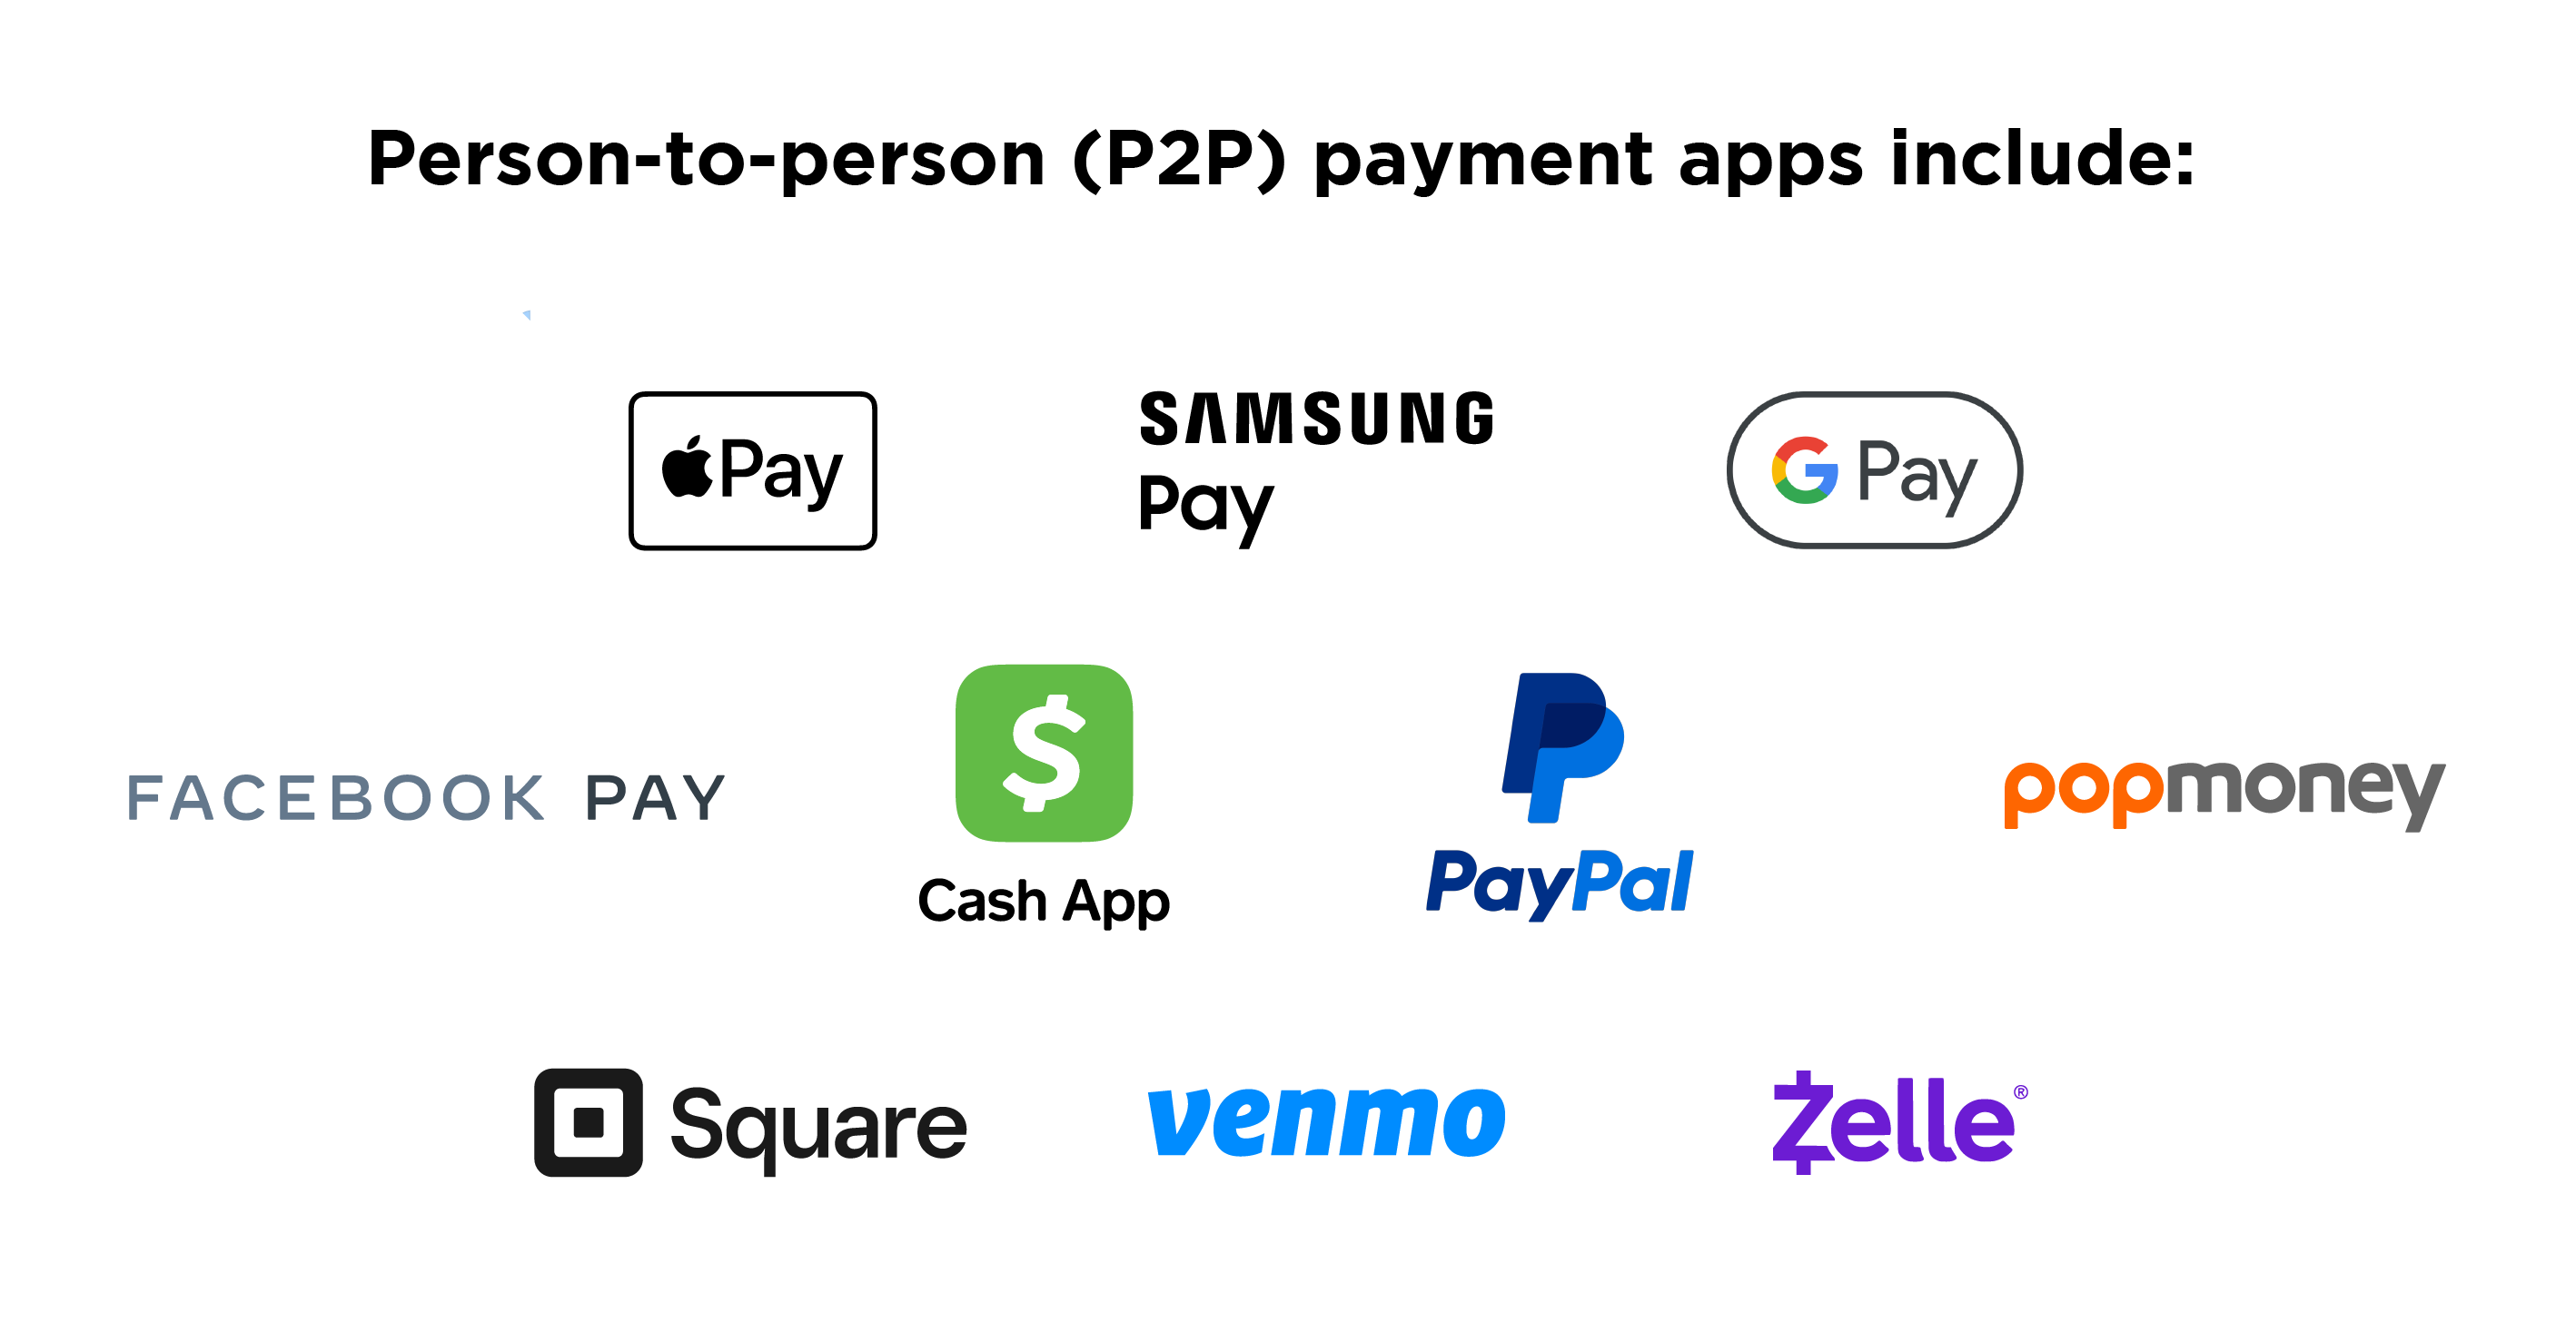 Person-to-person payment apps, including Apple Pay, Samsung Pay, Google Pay, Facebook Pay, Cash App, PayPal, popmoney, Square, Venmo, and Zelle